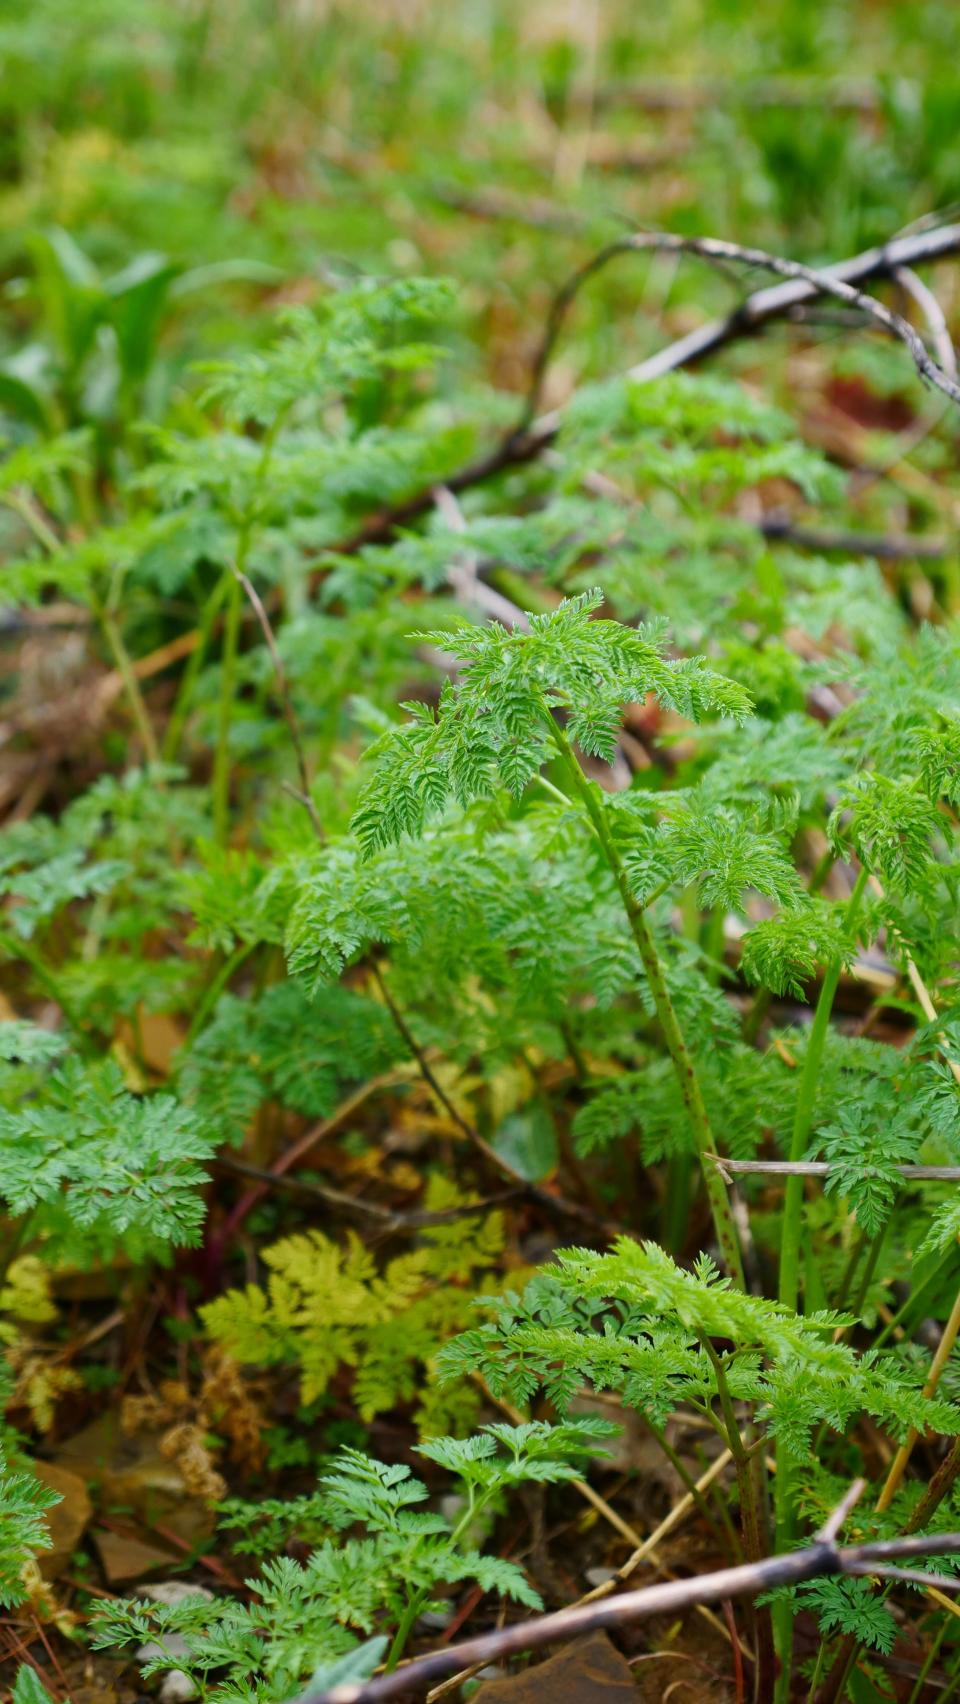 A young, tender poison hemlock plant in Granville.